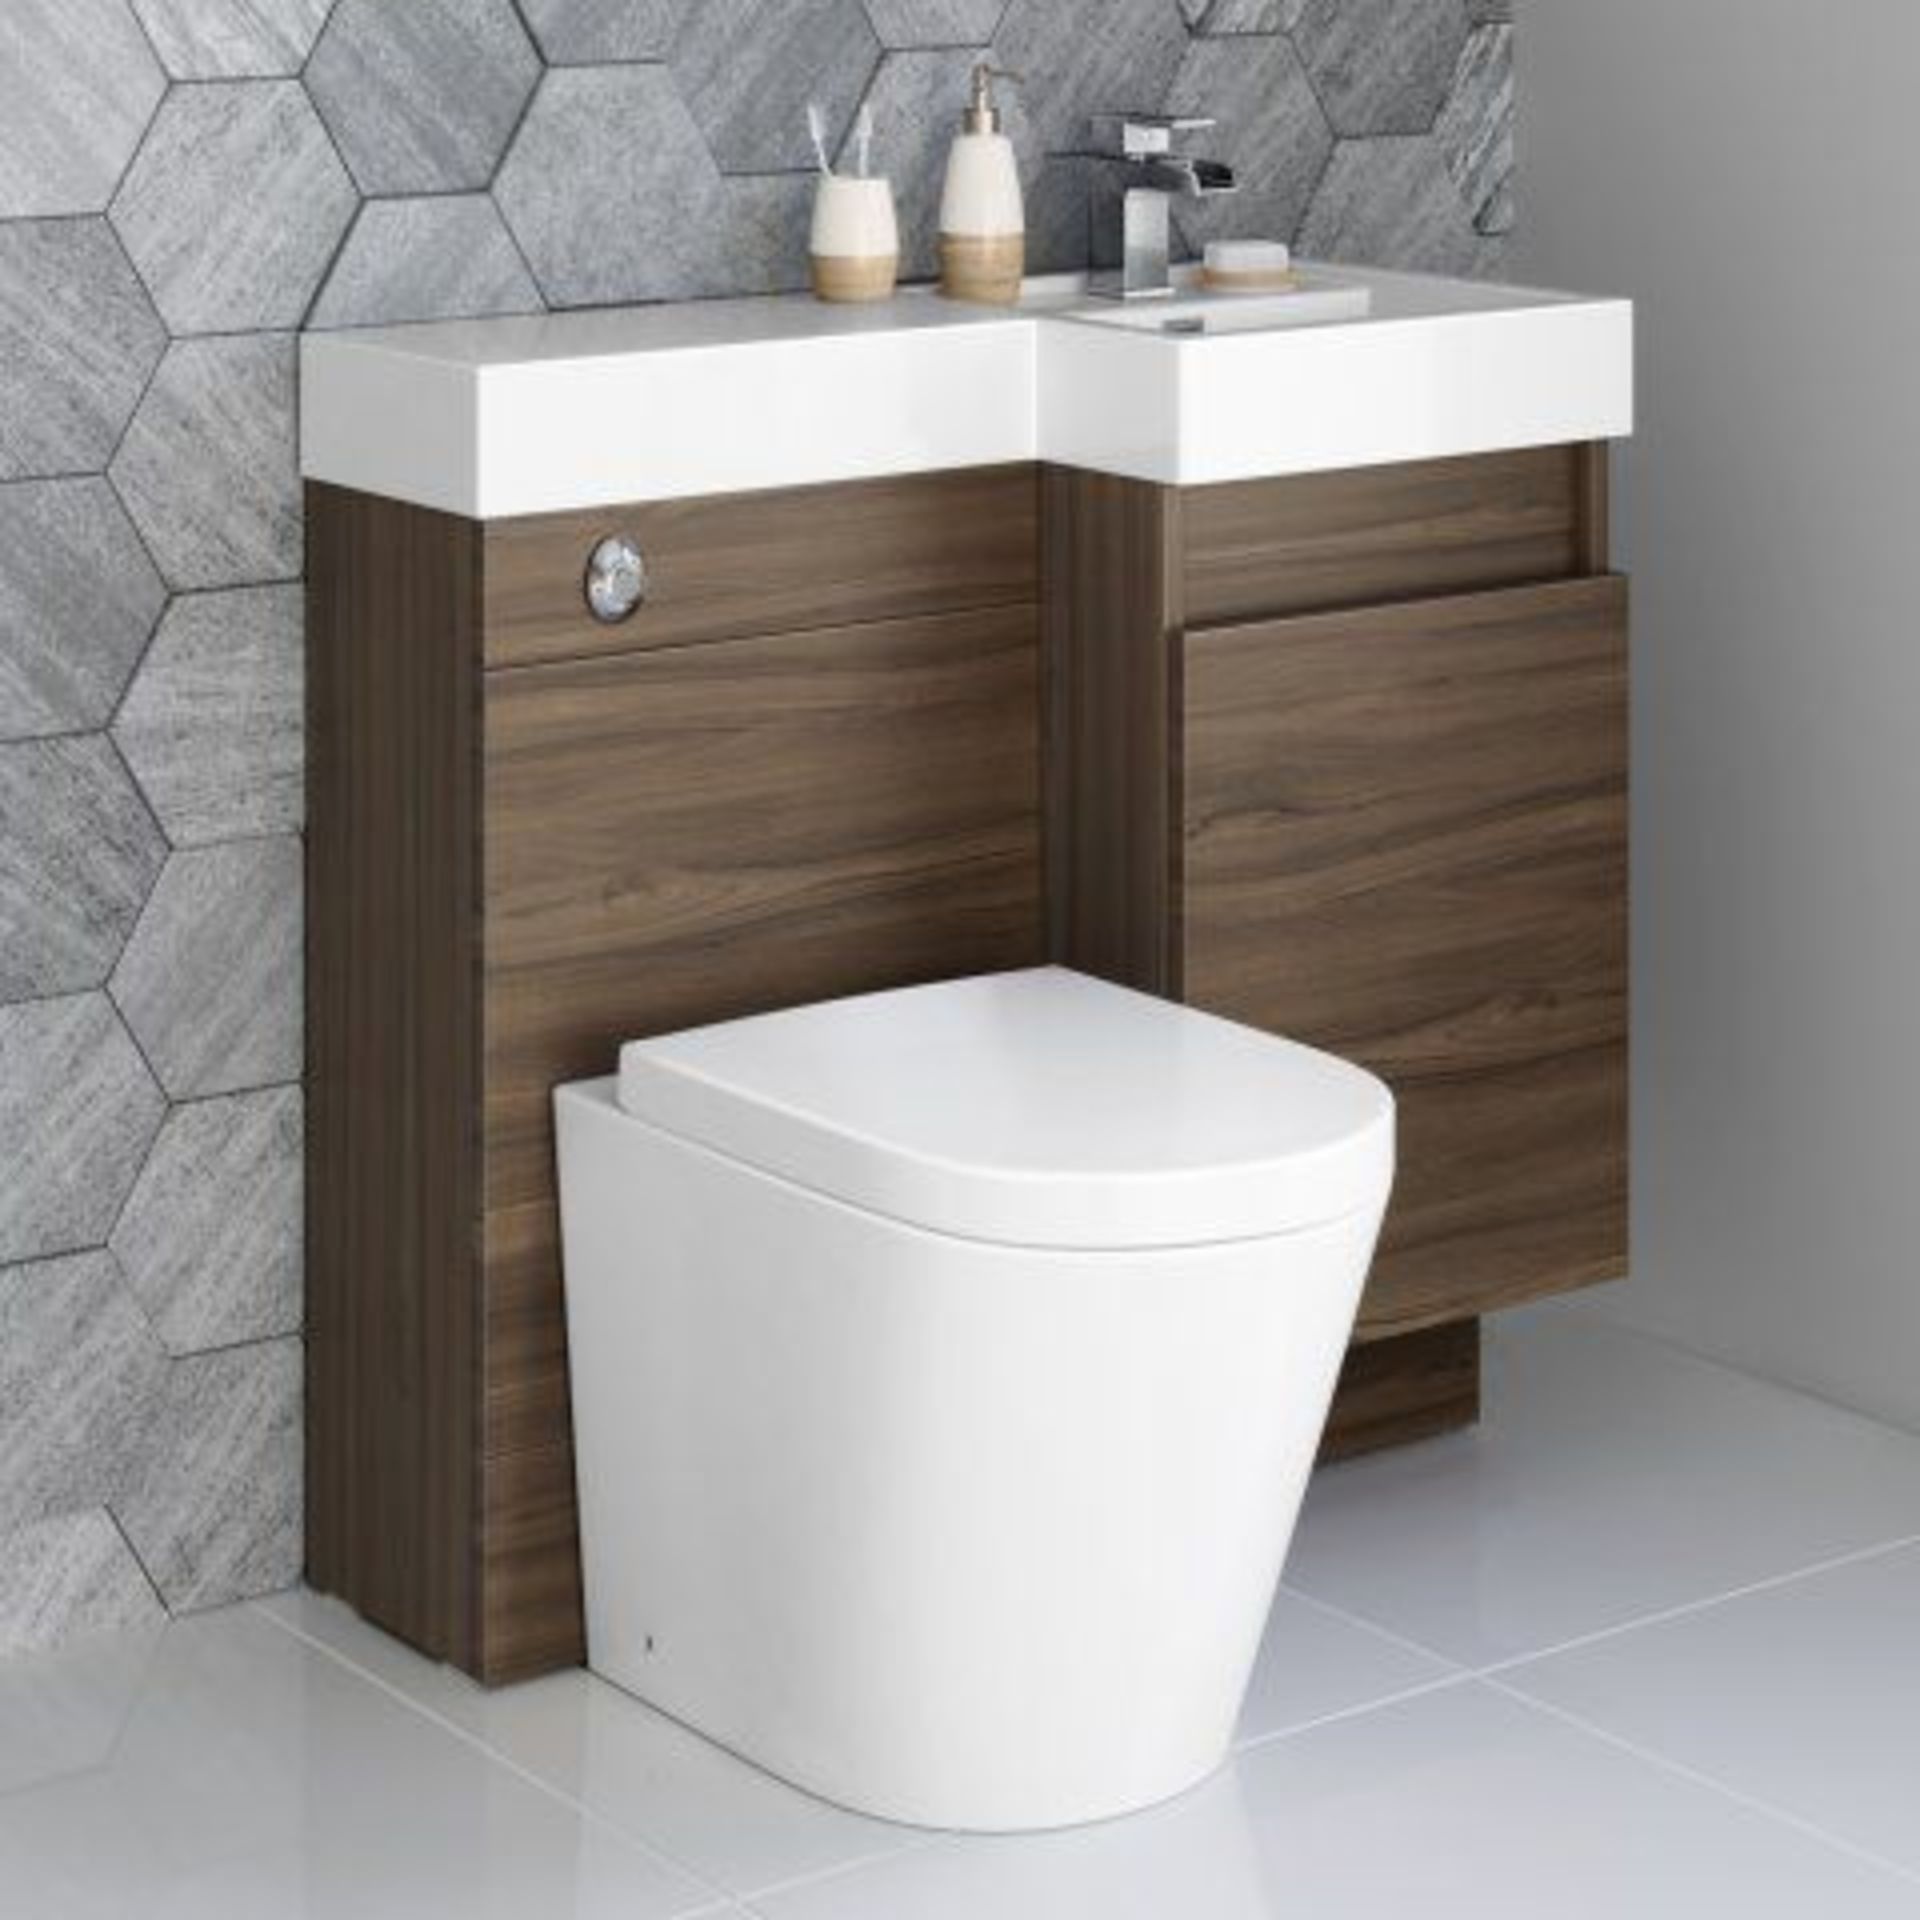 NEW & BOXED 906mm Olympia Walnut Effect Drawer Vanity Unit Right with Lyon Pan FULL SET. RRP £999.